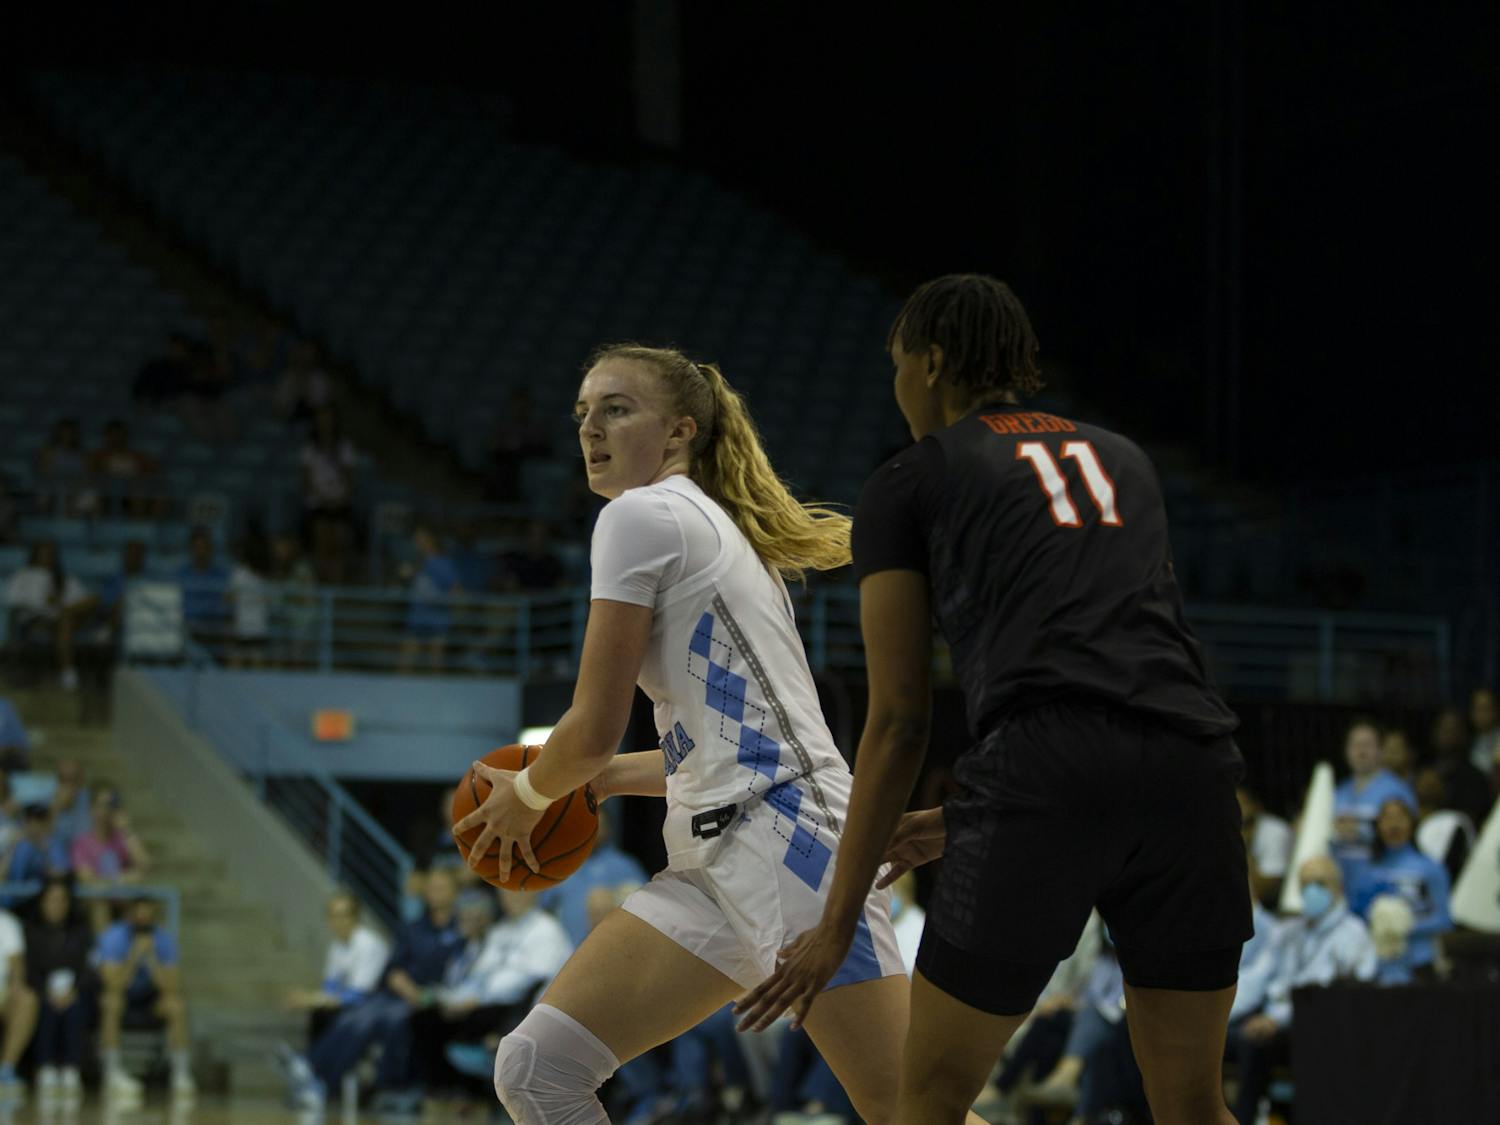 Junior forward/guard Alyssa Ustby (1) looks to pass the ball during the womens basketball game against Virginia Tech on Thursday, Feb. 23, 2023 at Carmichael Arena.